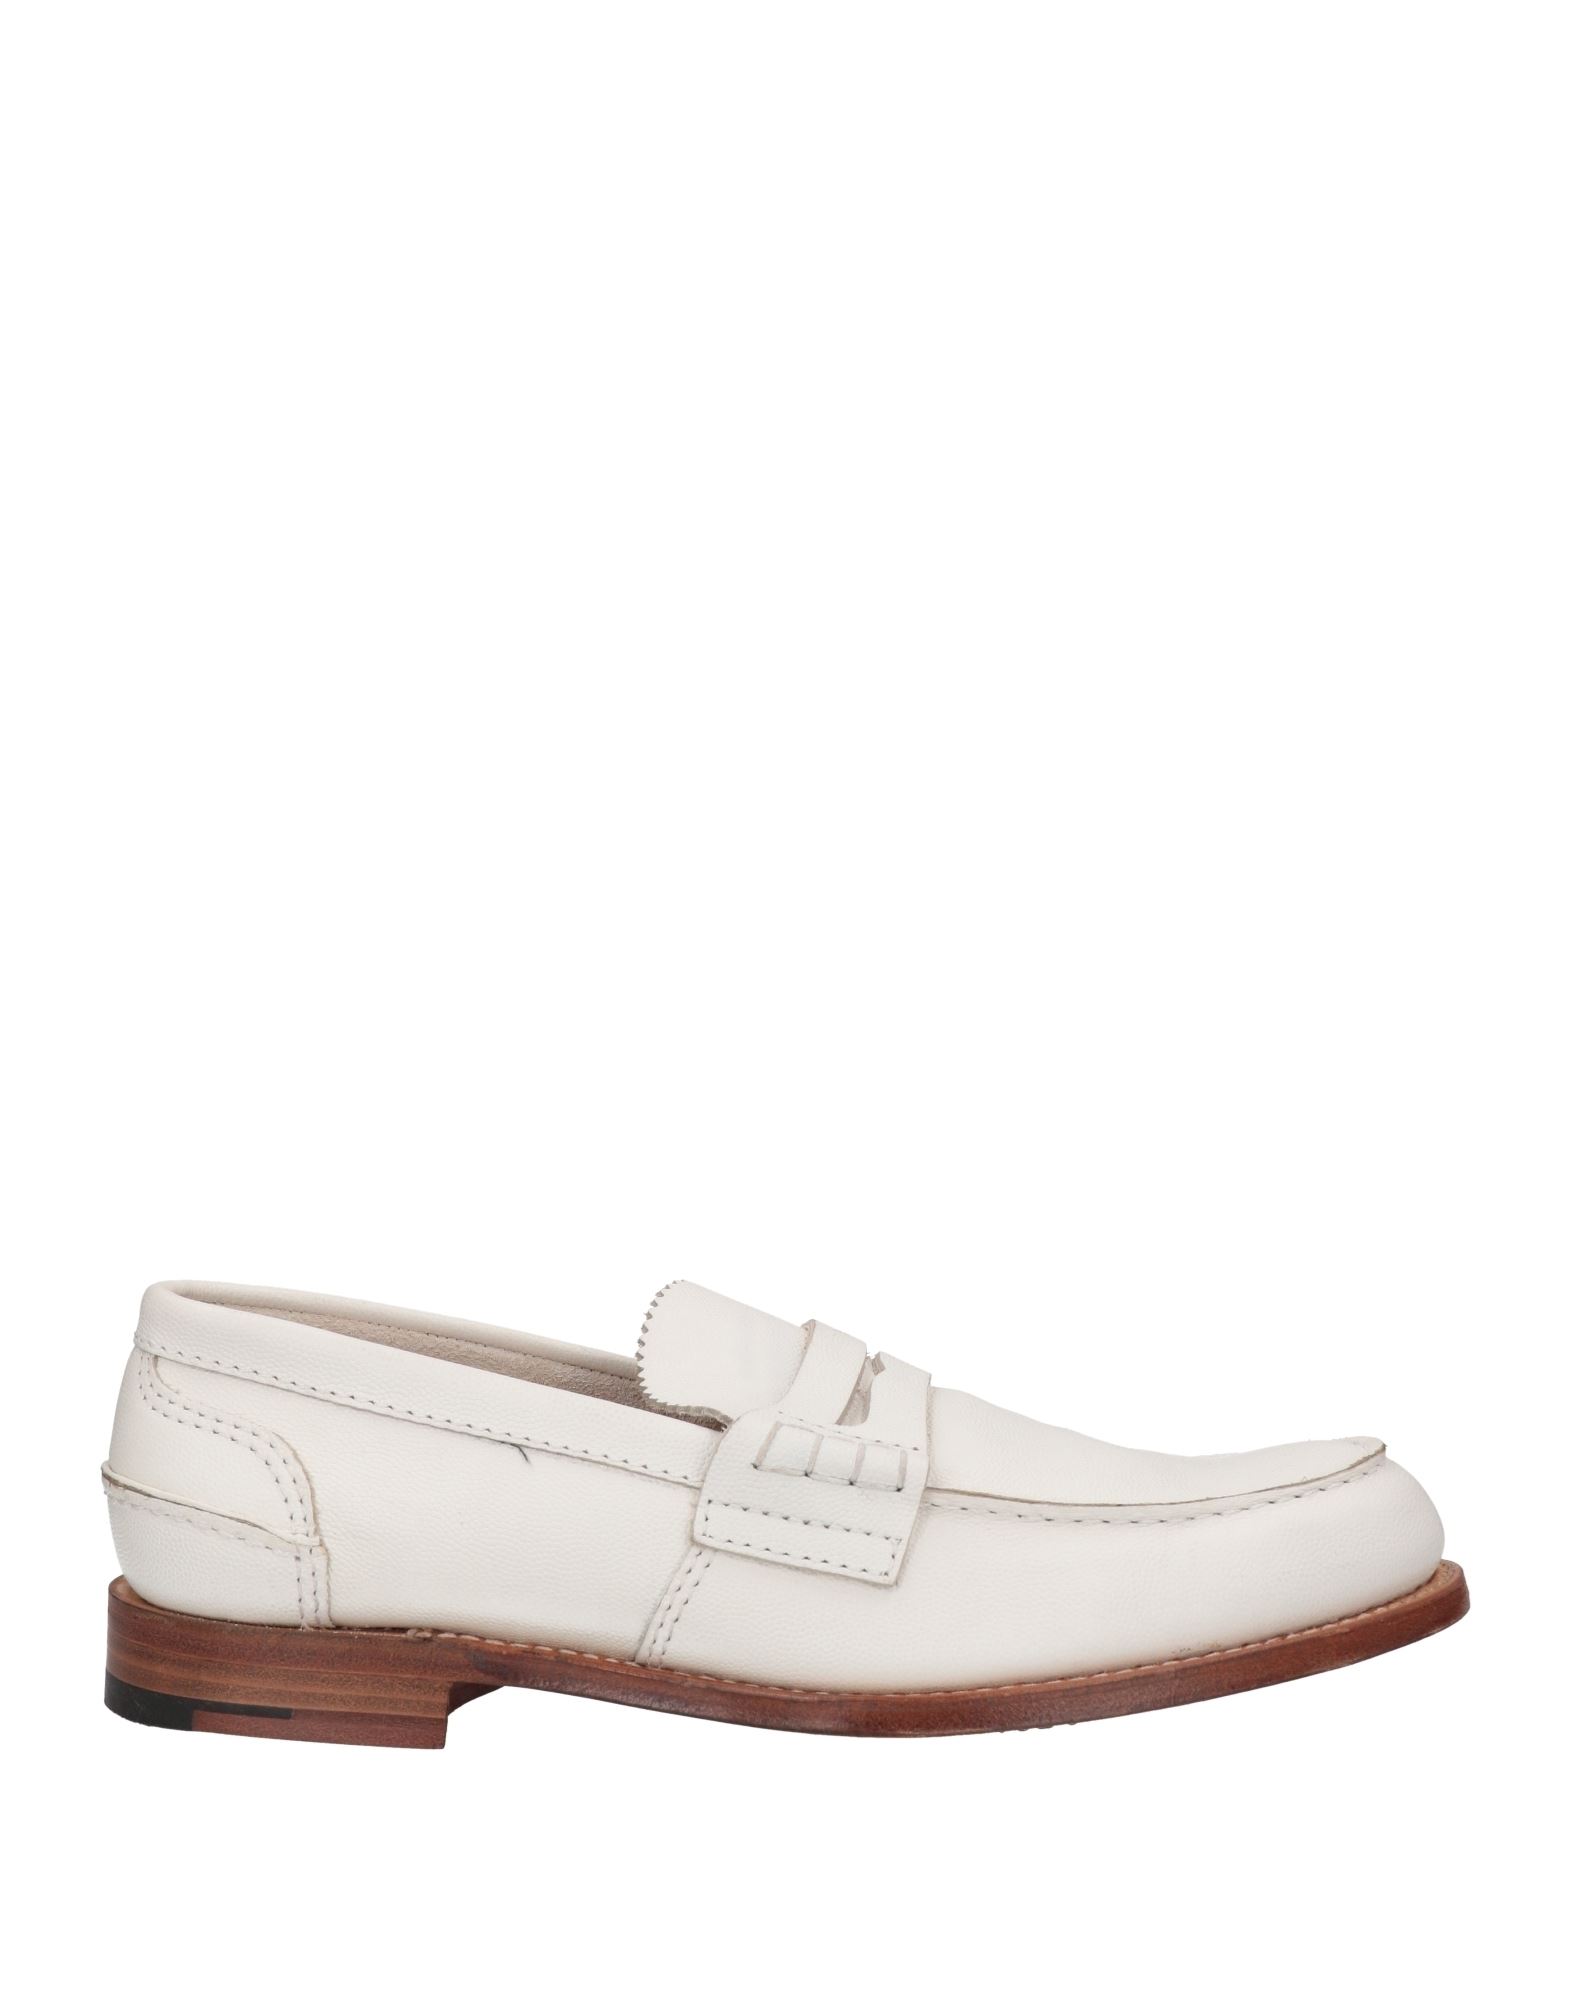 CHURCH'S CHURCH'S MAN LOAFERS WHITE SIZE 10.5 SOFT LEATHER